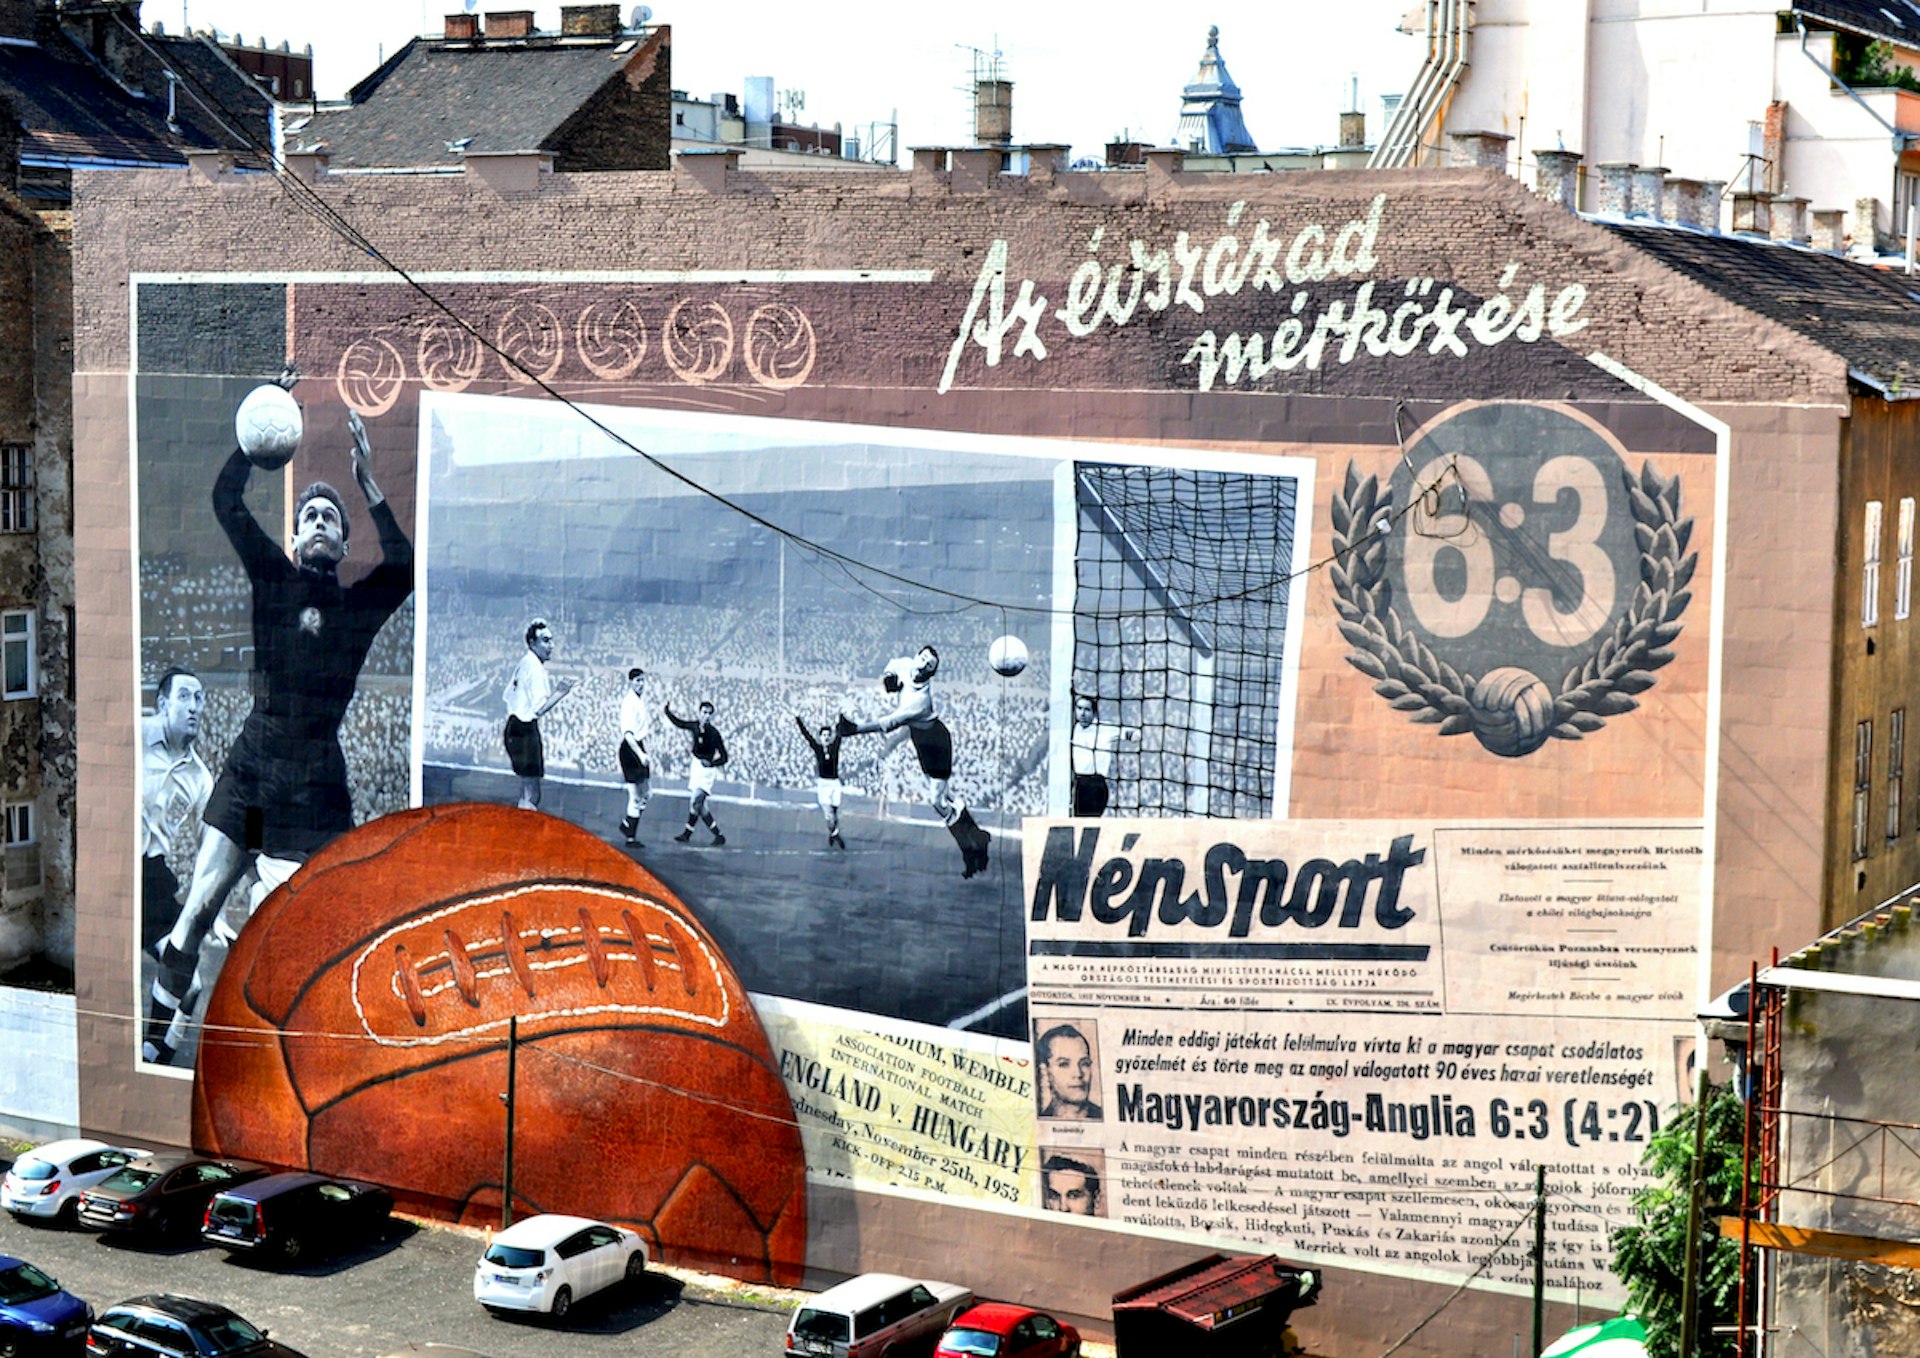 “6:3 Match of the Century” mural in District VII, Budapest, Hungary